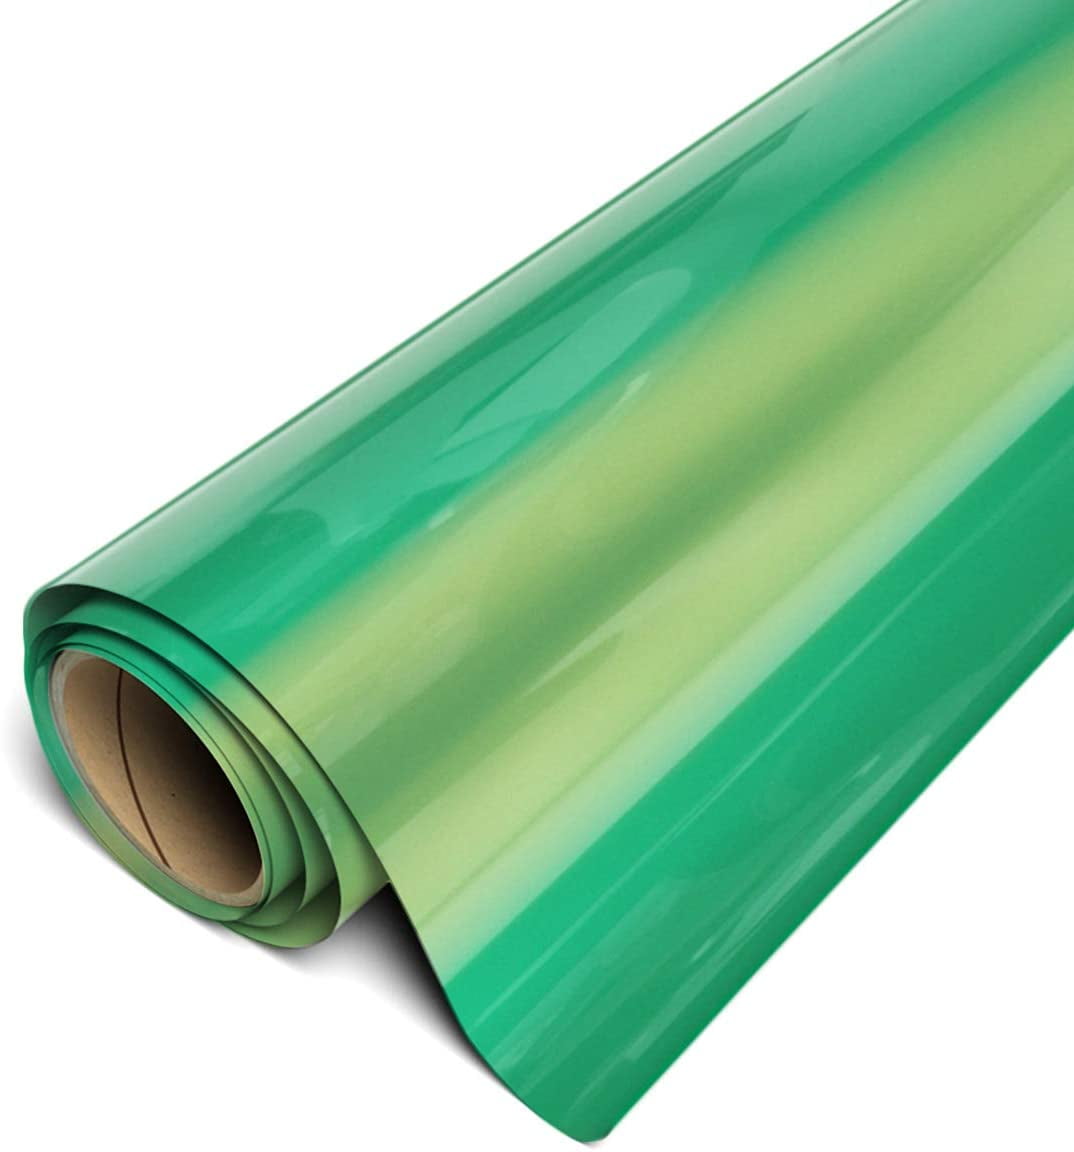 Emerald Green Heat Transfer Vinyl Rolls-12 x 10FT Iron on Vinyl for  Shirts,Emerald Green Iron on for Cricut&All Cutter Machine-Easy to Cut&Weed  for Craft Heat Vinyl Design（Emerald Green） 